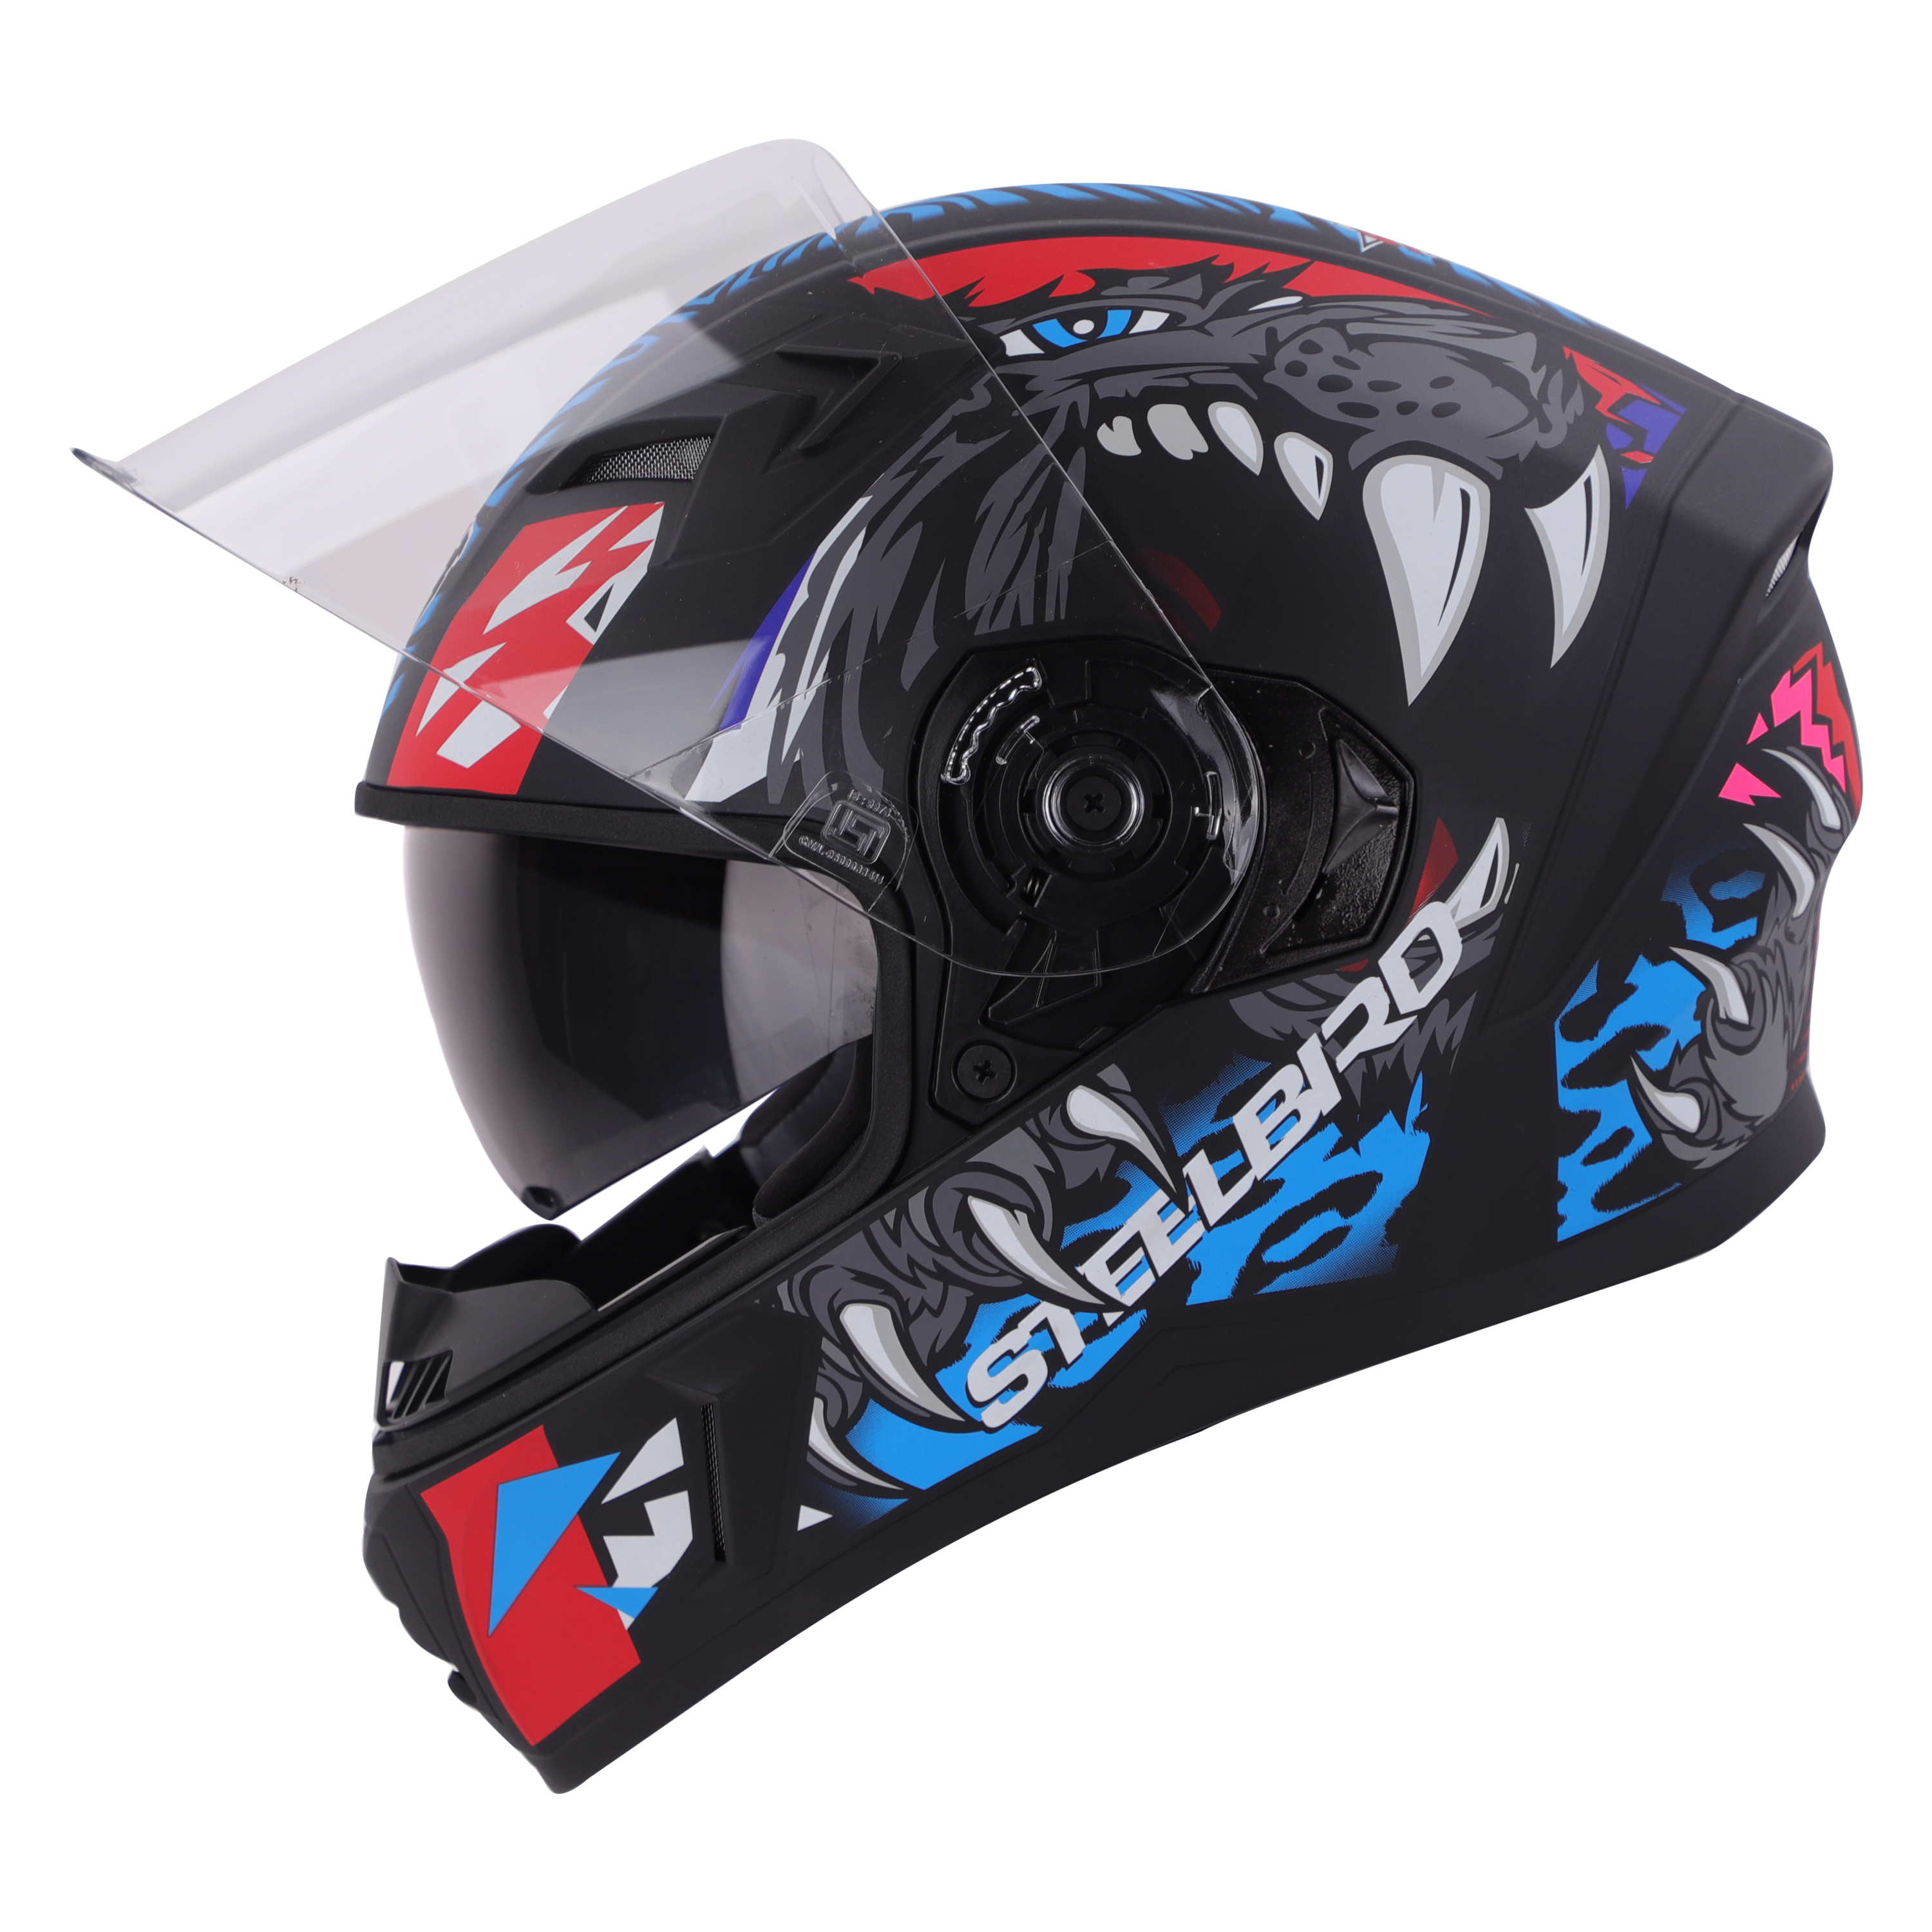 SBA-21 PANTHA MAT BLACK WITH RED/BLUE (WITH INNER SUN SHIELD & LONG CHEEK PAD INTERIOR)